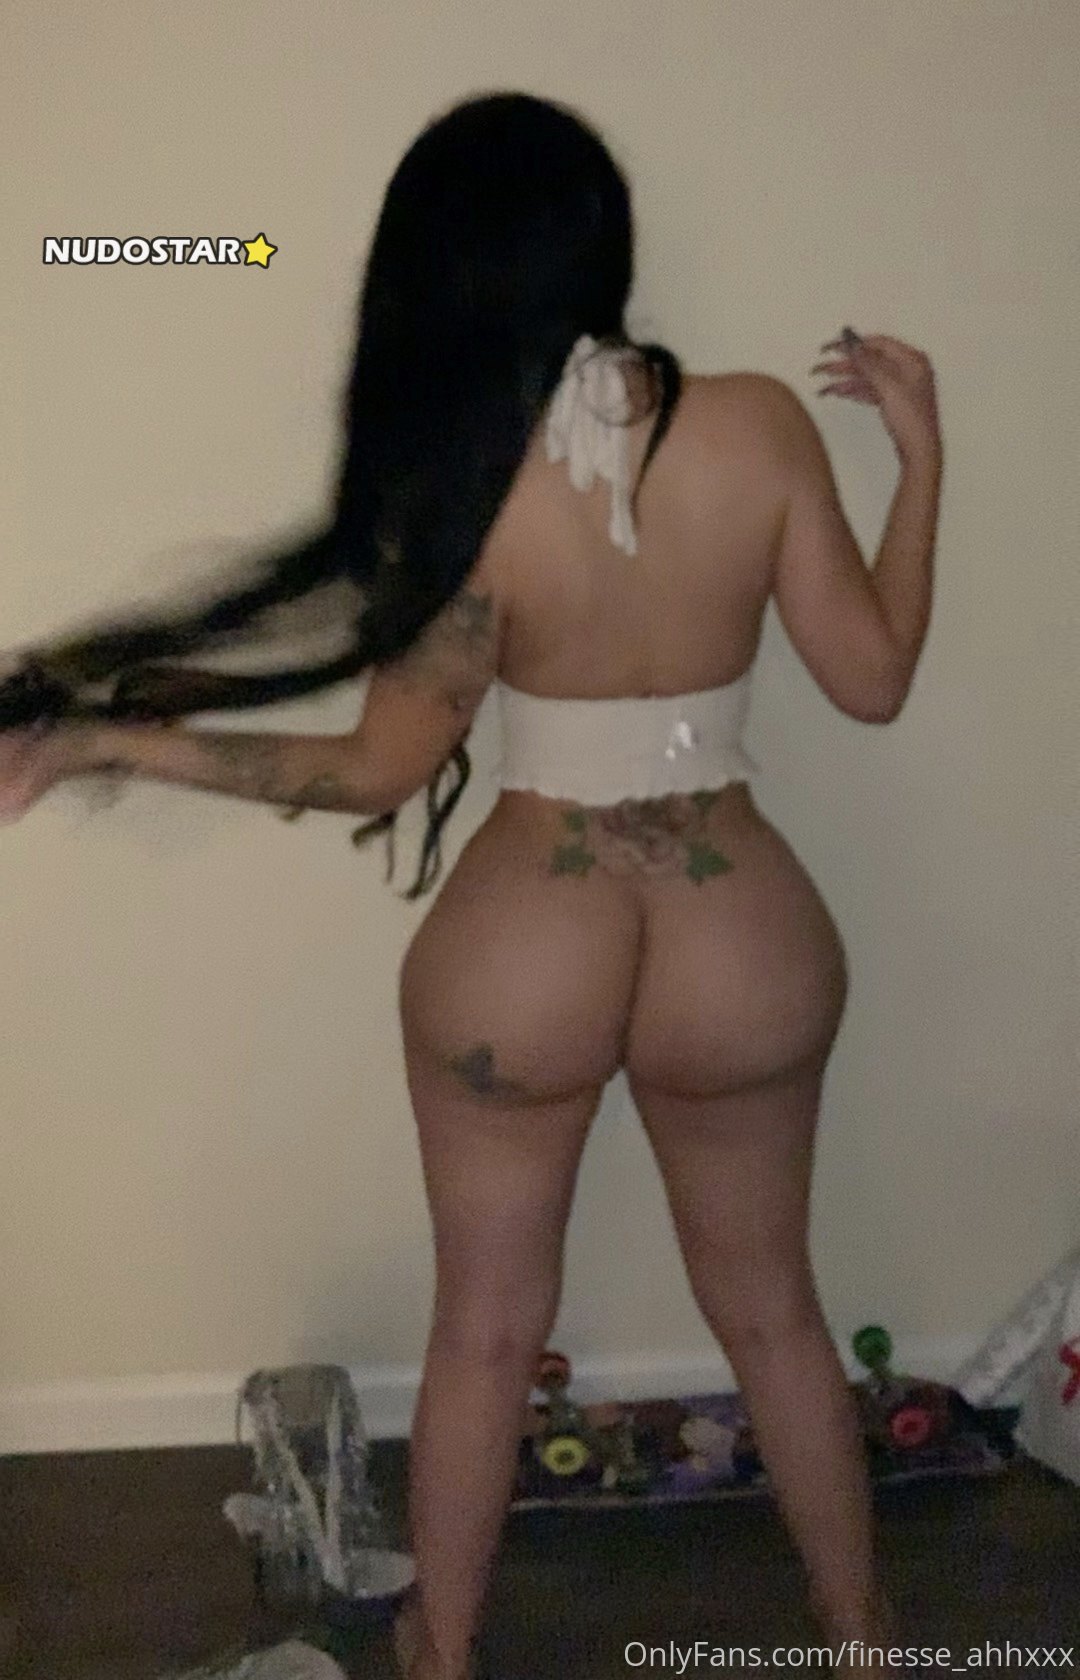 Finesse_ahh – finesse_ahhxxx Onlyfans Nudes Leaks (261 photos + 5 videos)